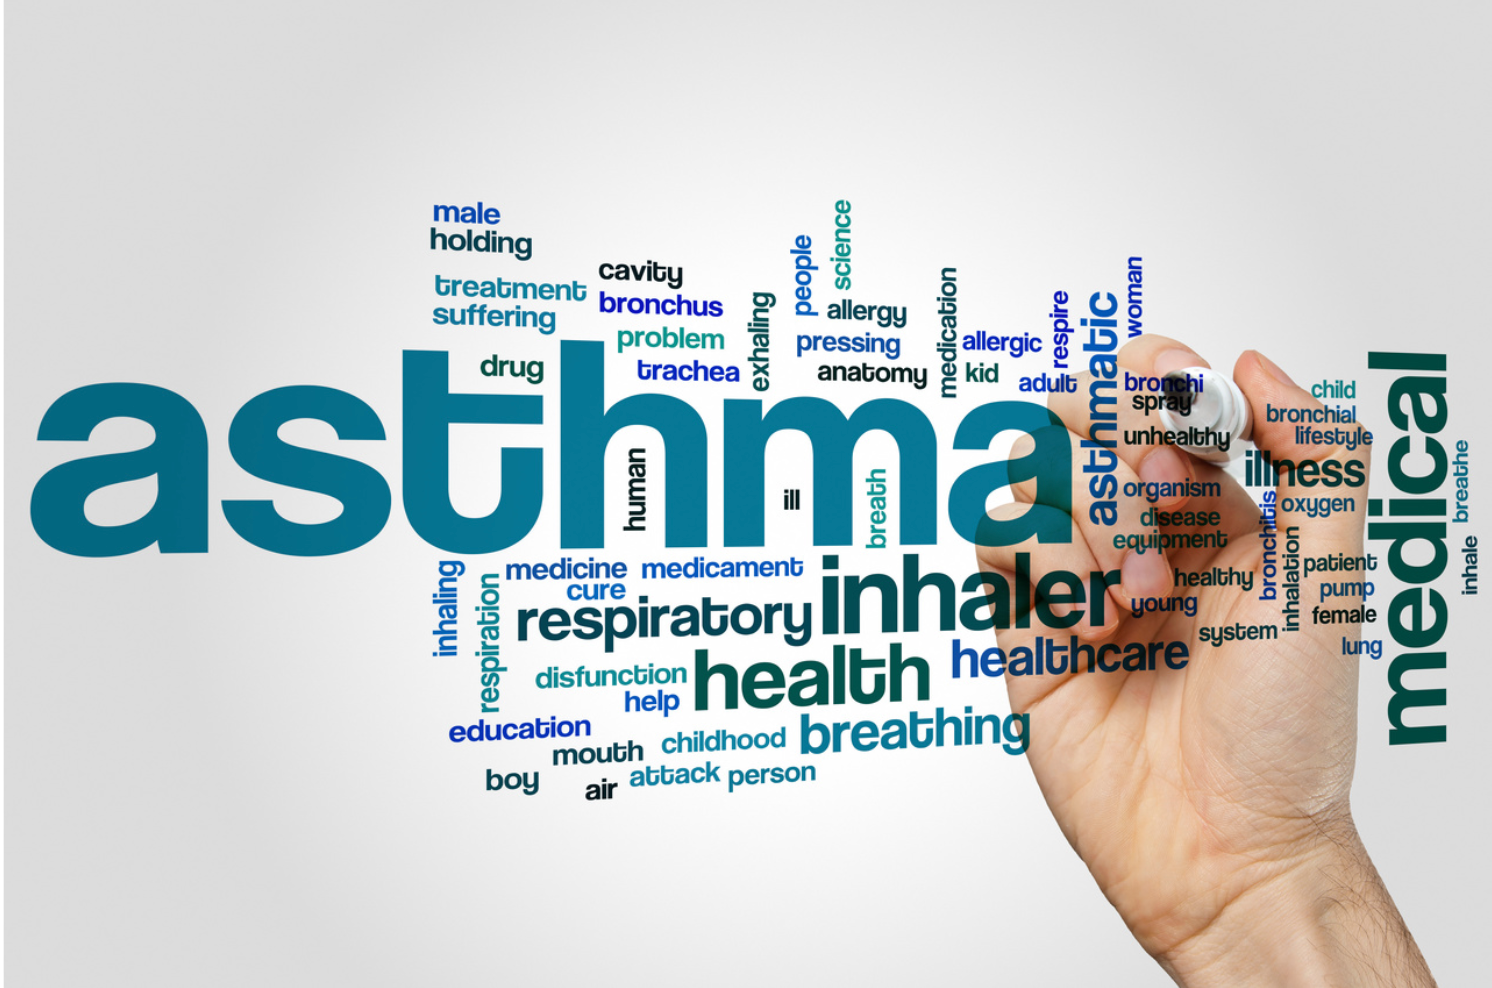 Clinical Overview: PT027 for Exacerbation Risk Reduction, Improved Lung Function in Asthma